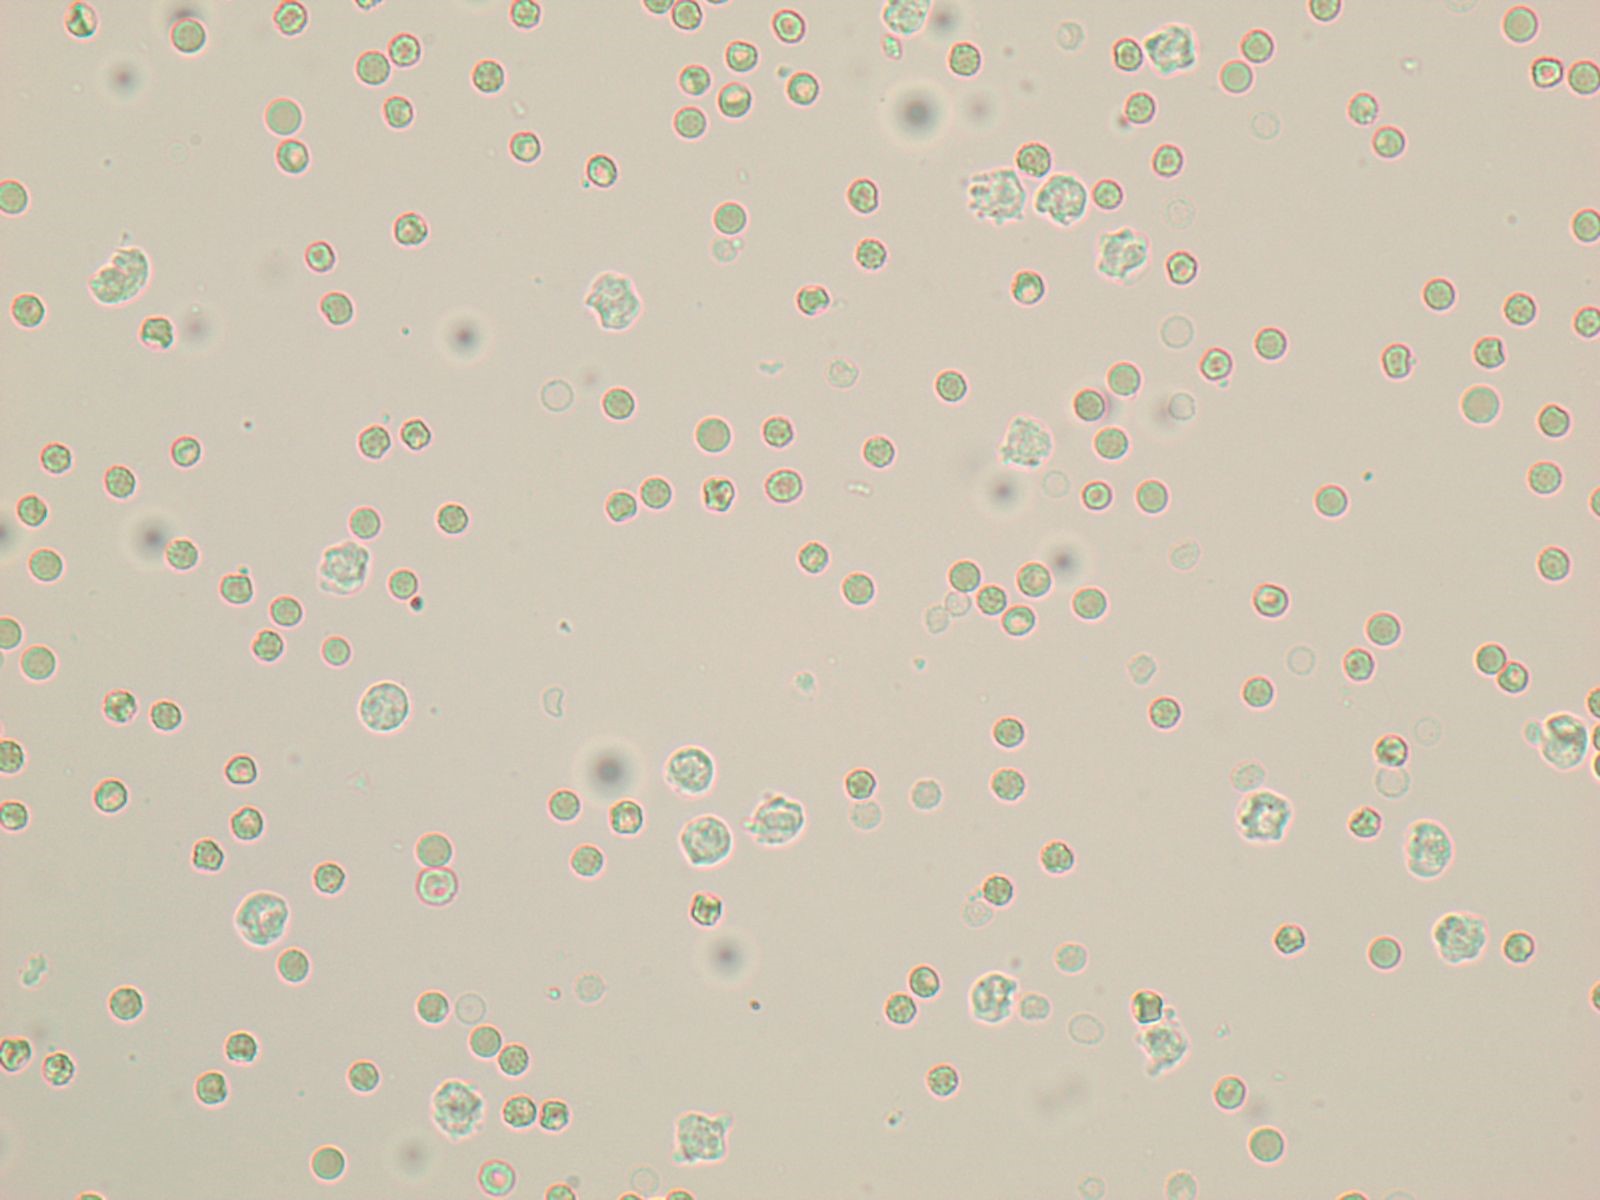 40x objective of pyuria and hematuria. In this image the RBCs appear deeper yellow (from Hb) and smaller than the lighter in color and grainy WBCs.